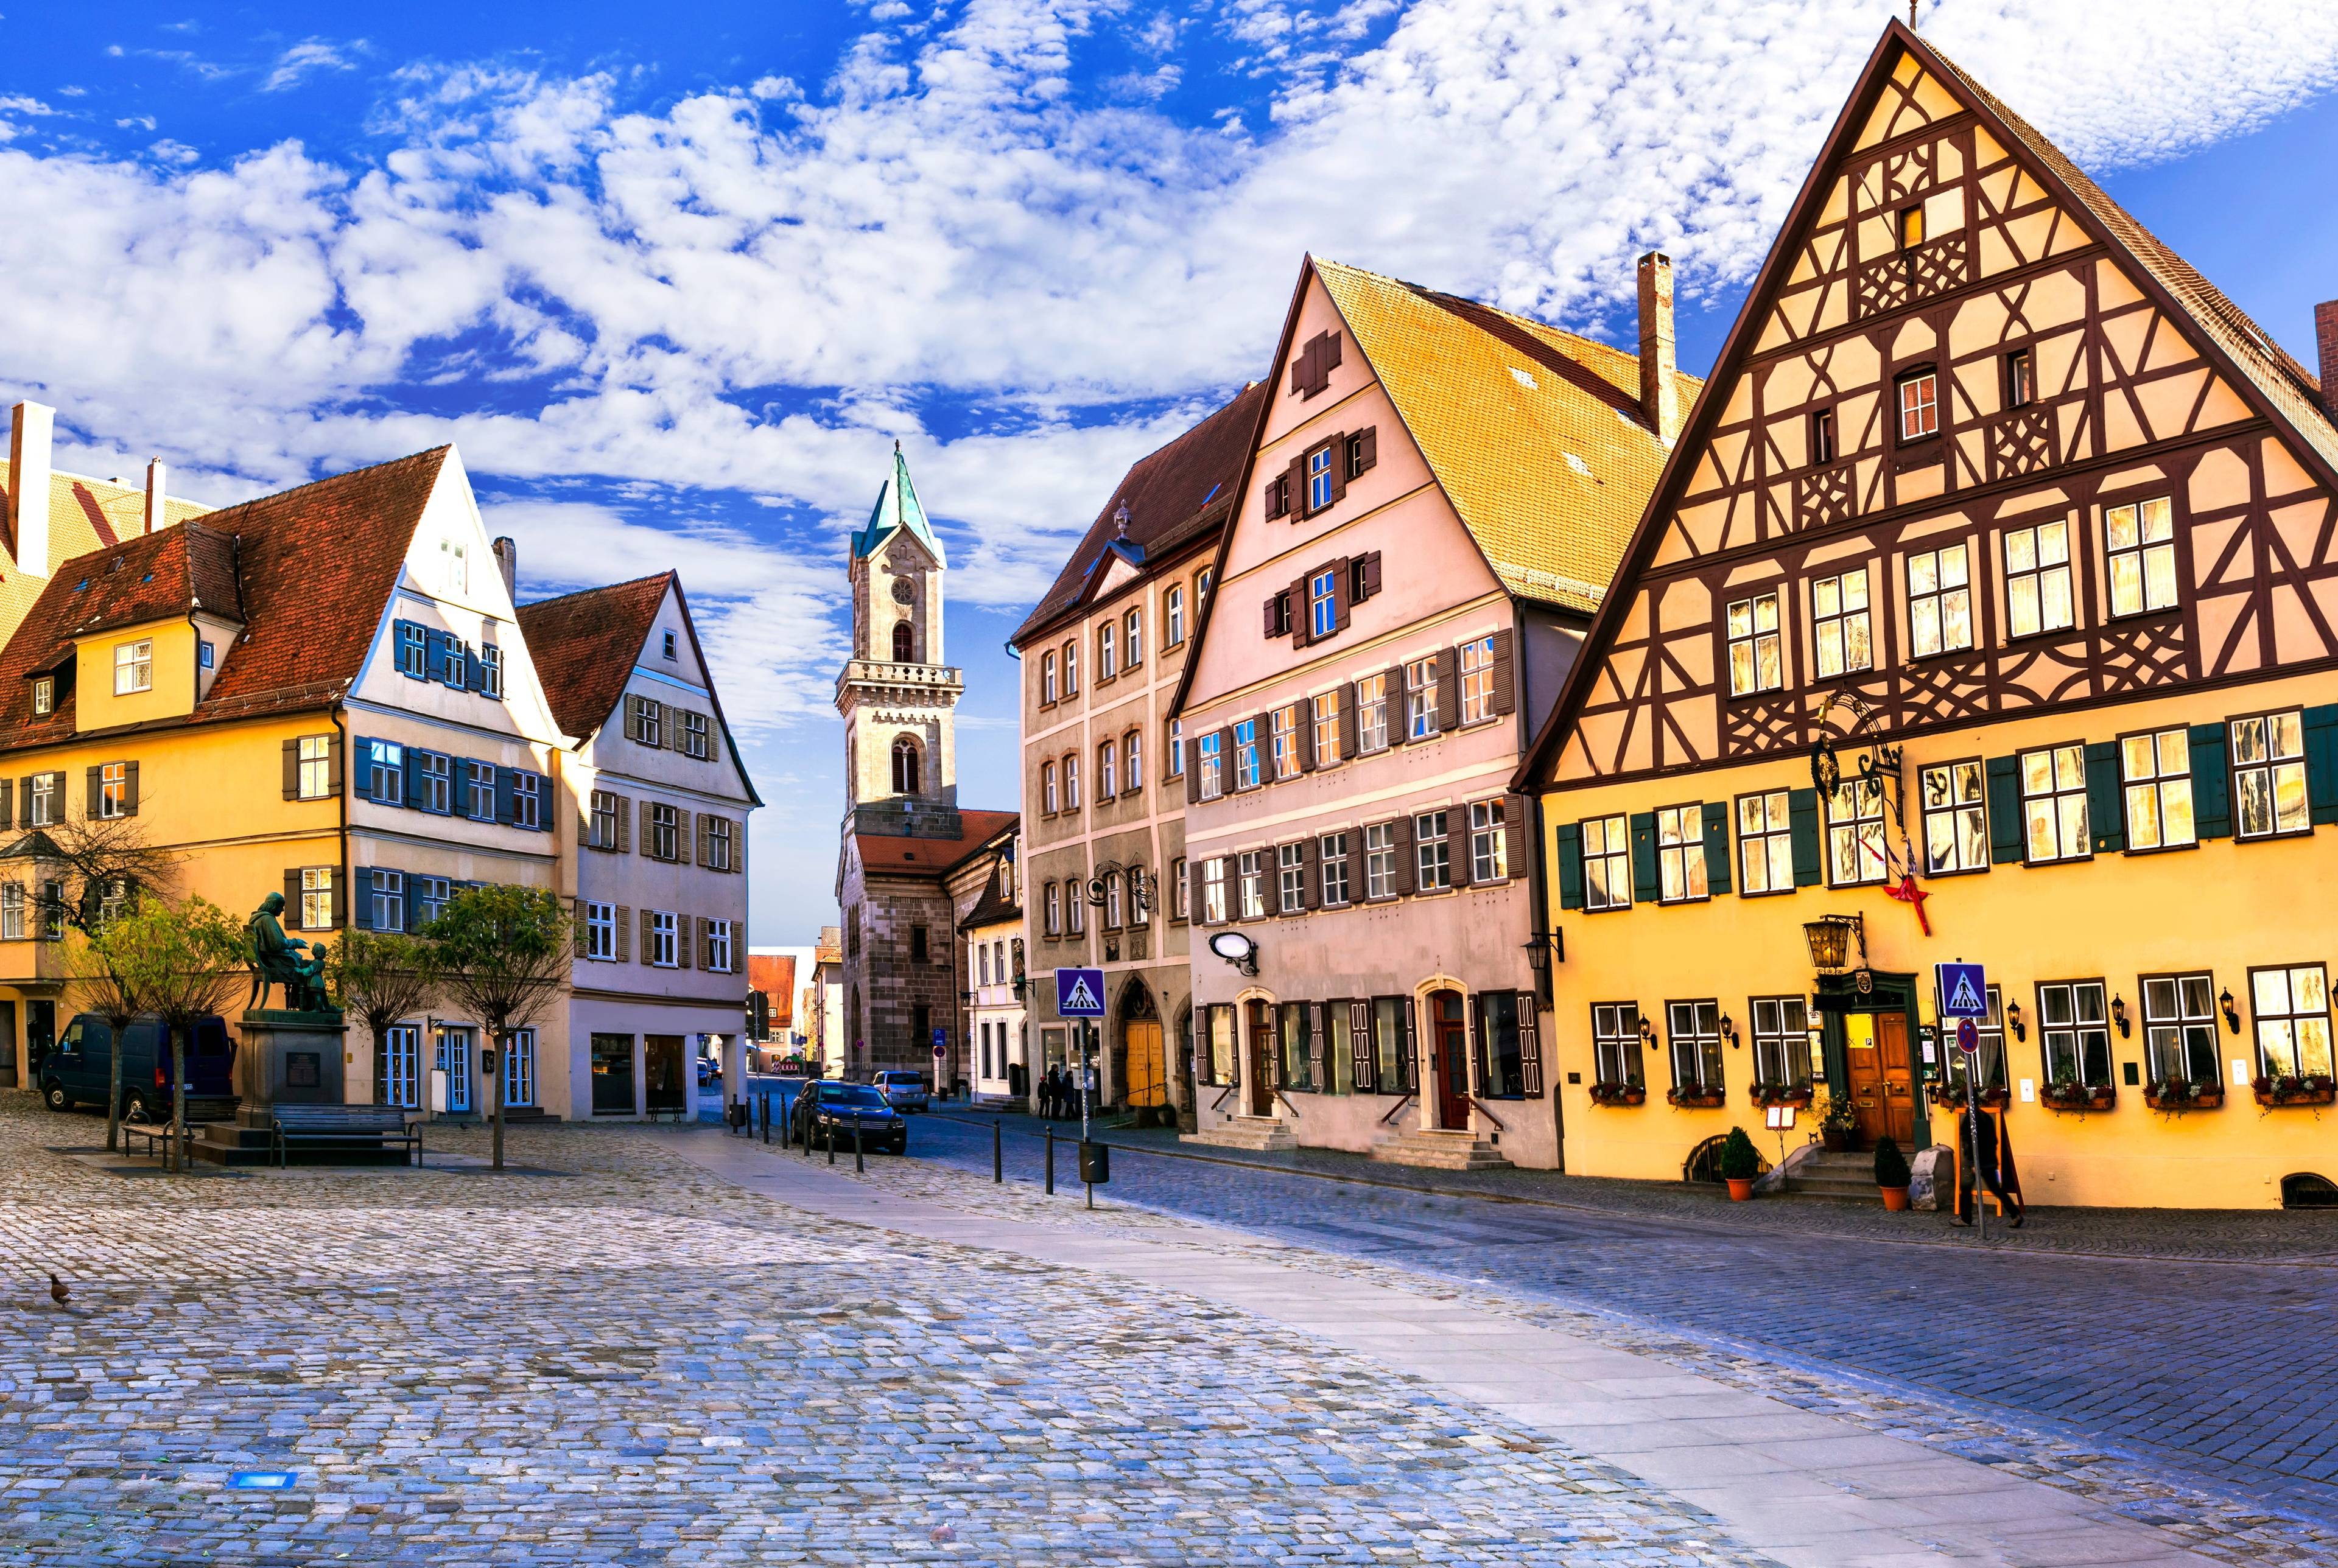 Munich – Nuremberg: Falling in Love With the Romantic Road